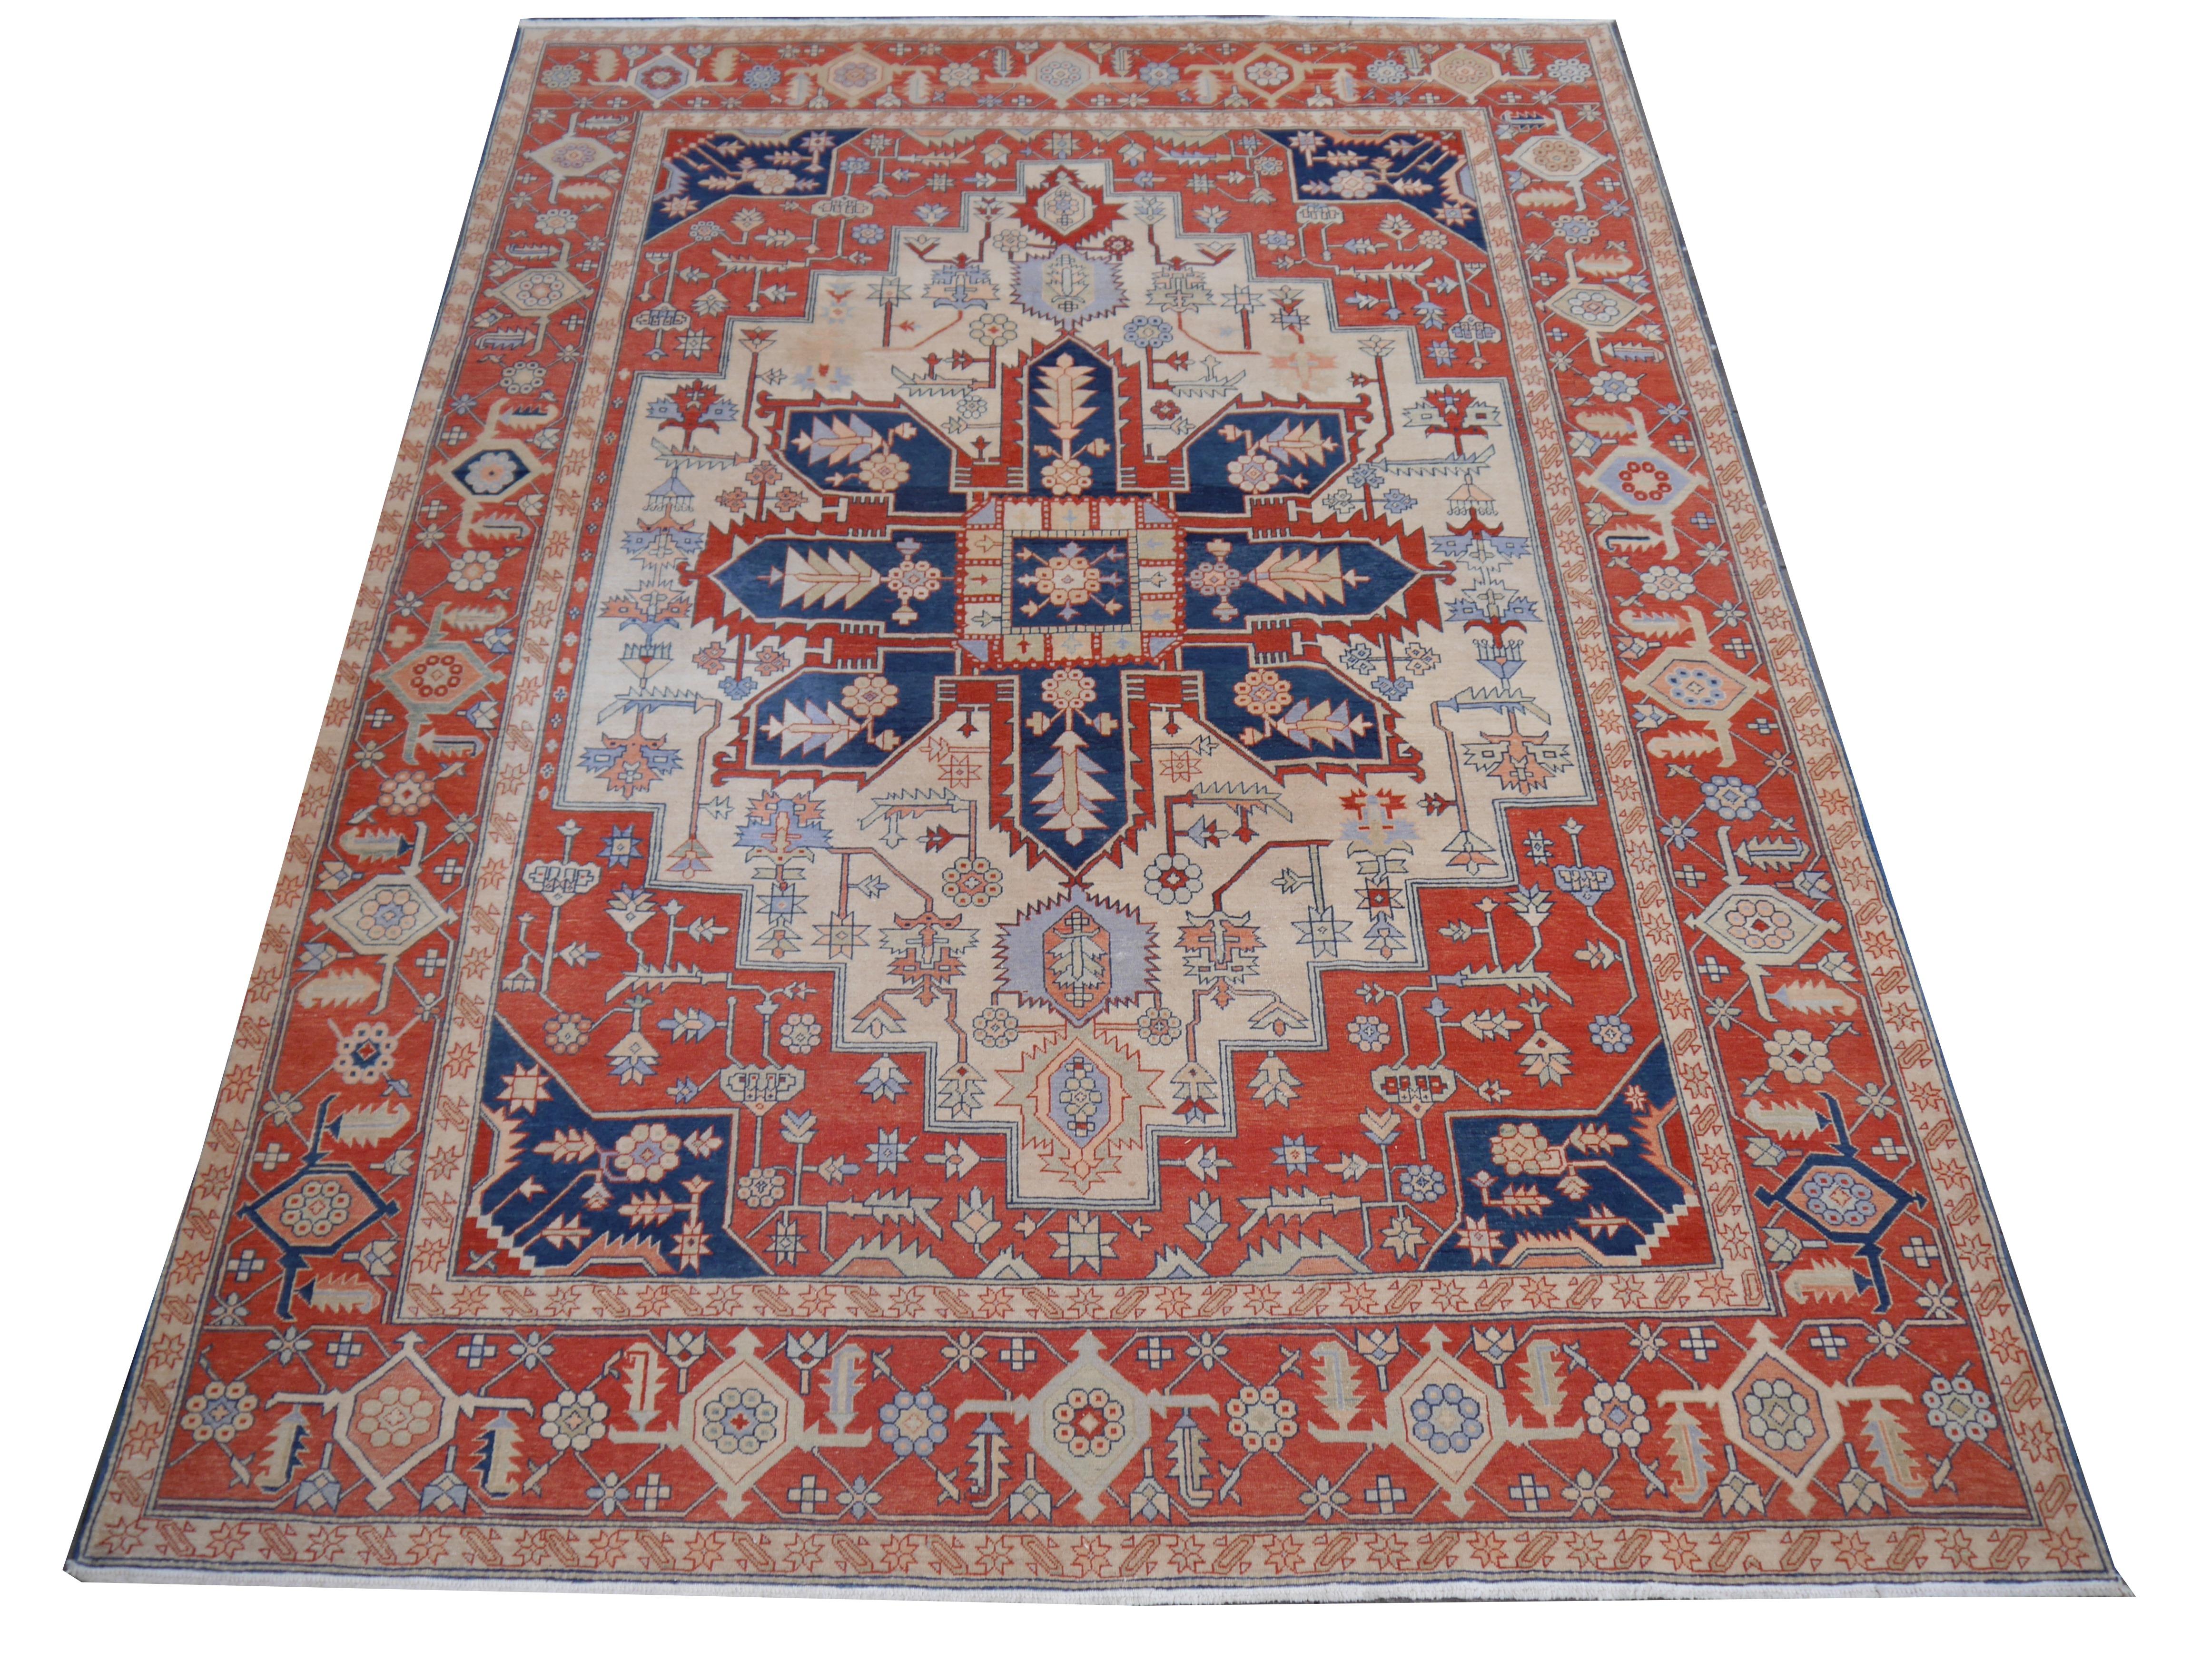 Turkish Azeri Heriz Rug 14 x 11 ft.
A large sized Azeri Heriz Serapi rug. The pile is made of high end quality wool - hand spun, hand dyed with all vegetable dyes and knotted by master weavers. The rug is very dense and heavy, about 65 kg or 142 lb.